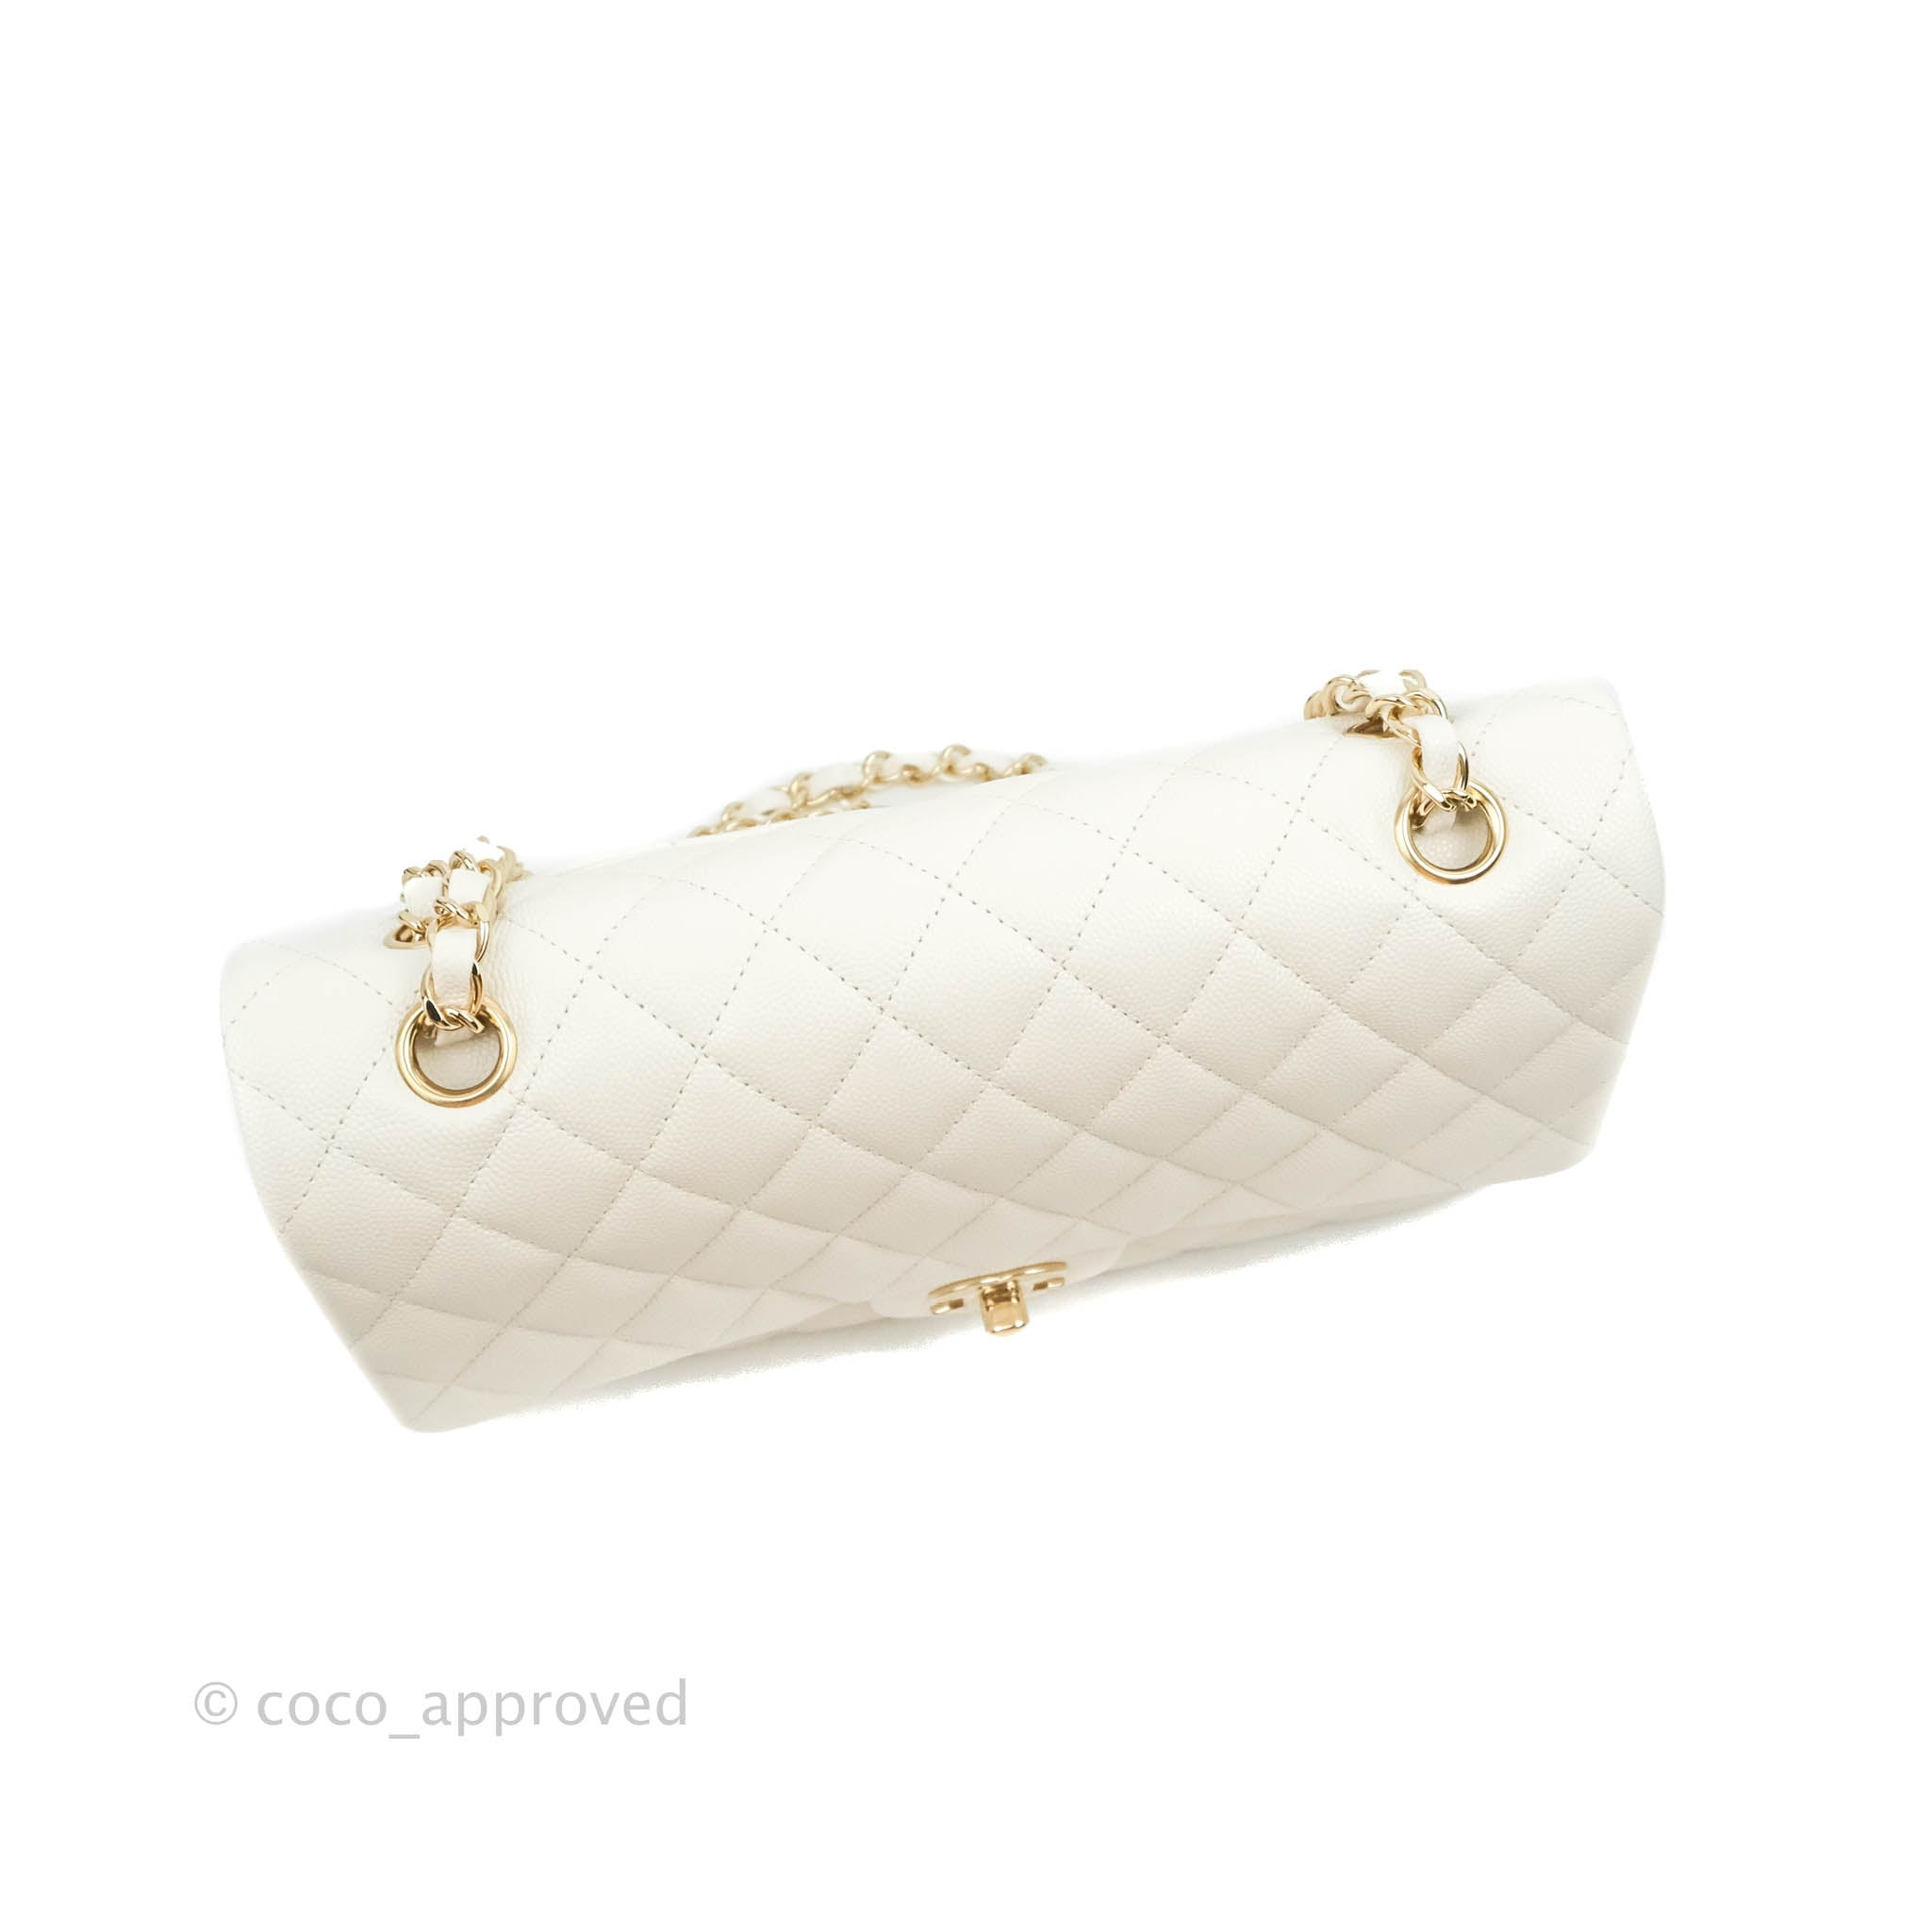 chanel bag white and gold